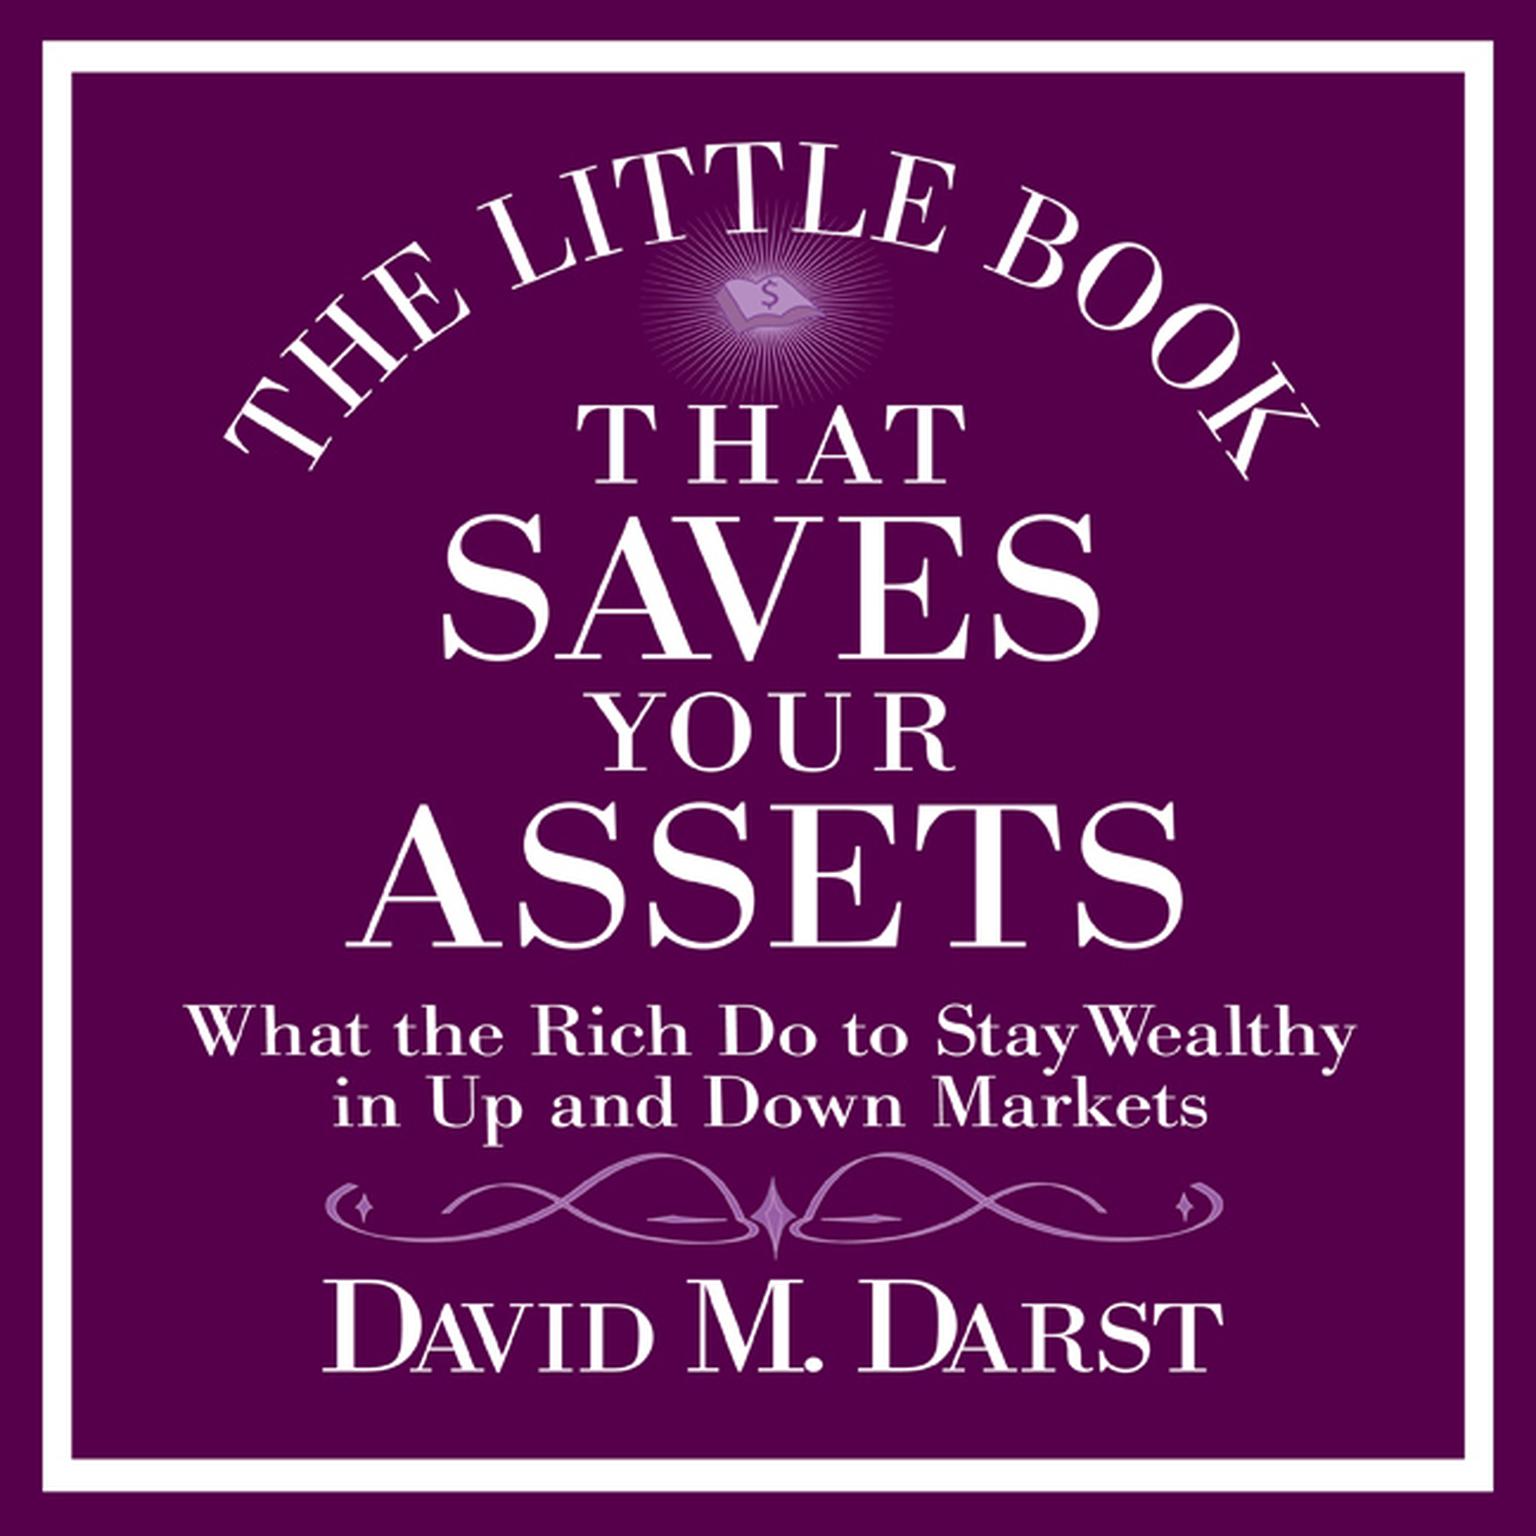 The Little Book That Saves Your Assets: What the Rich Do to Stay Wealthy in Up and Down Markets Audiobook, by David M. Darst